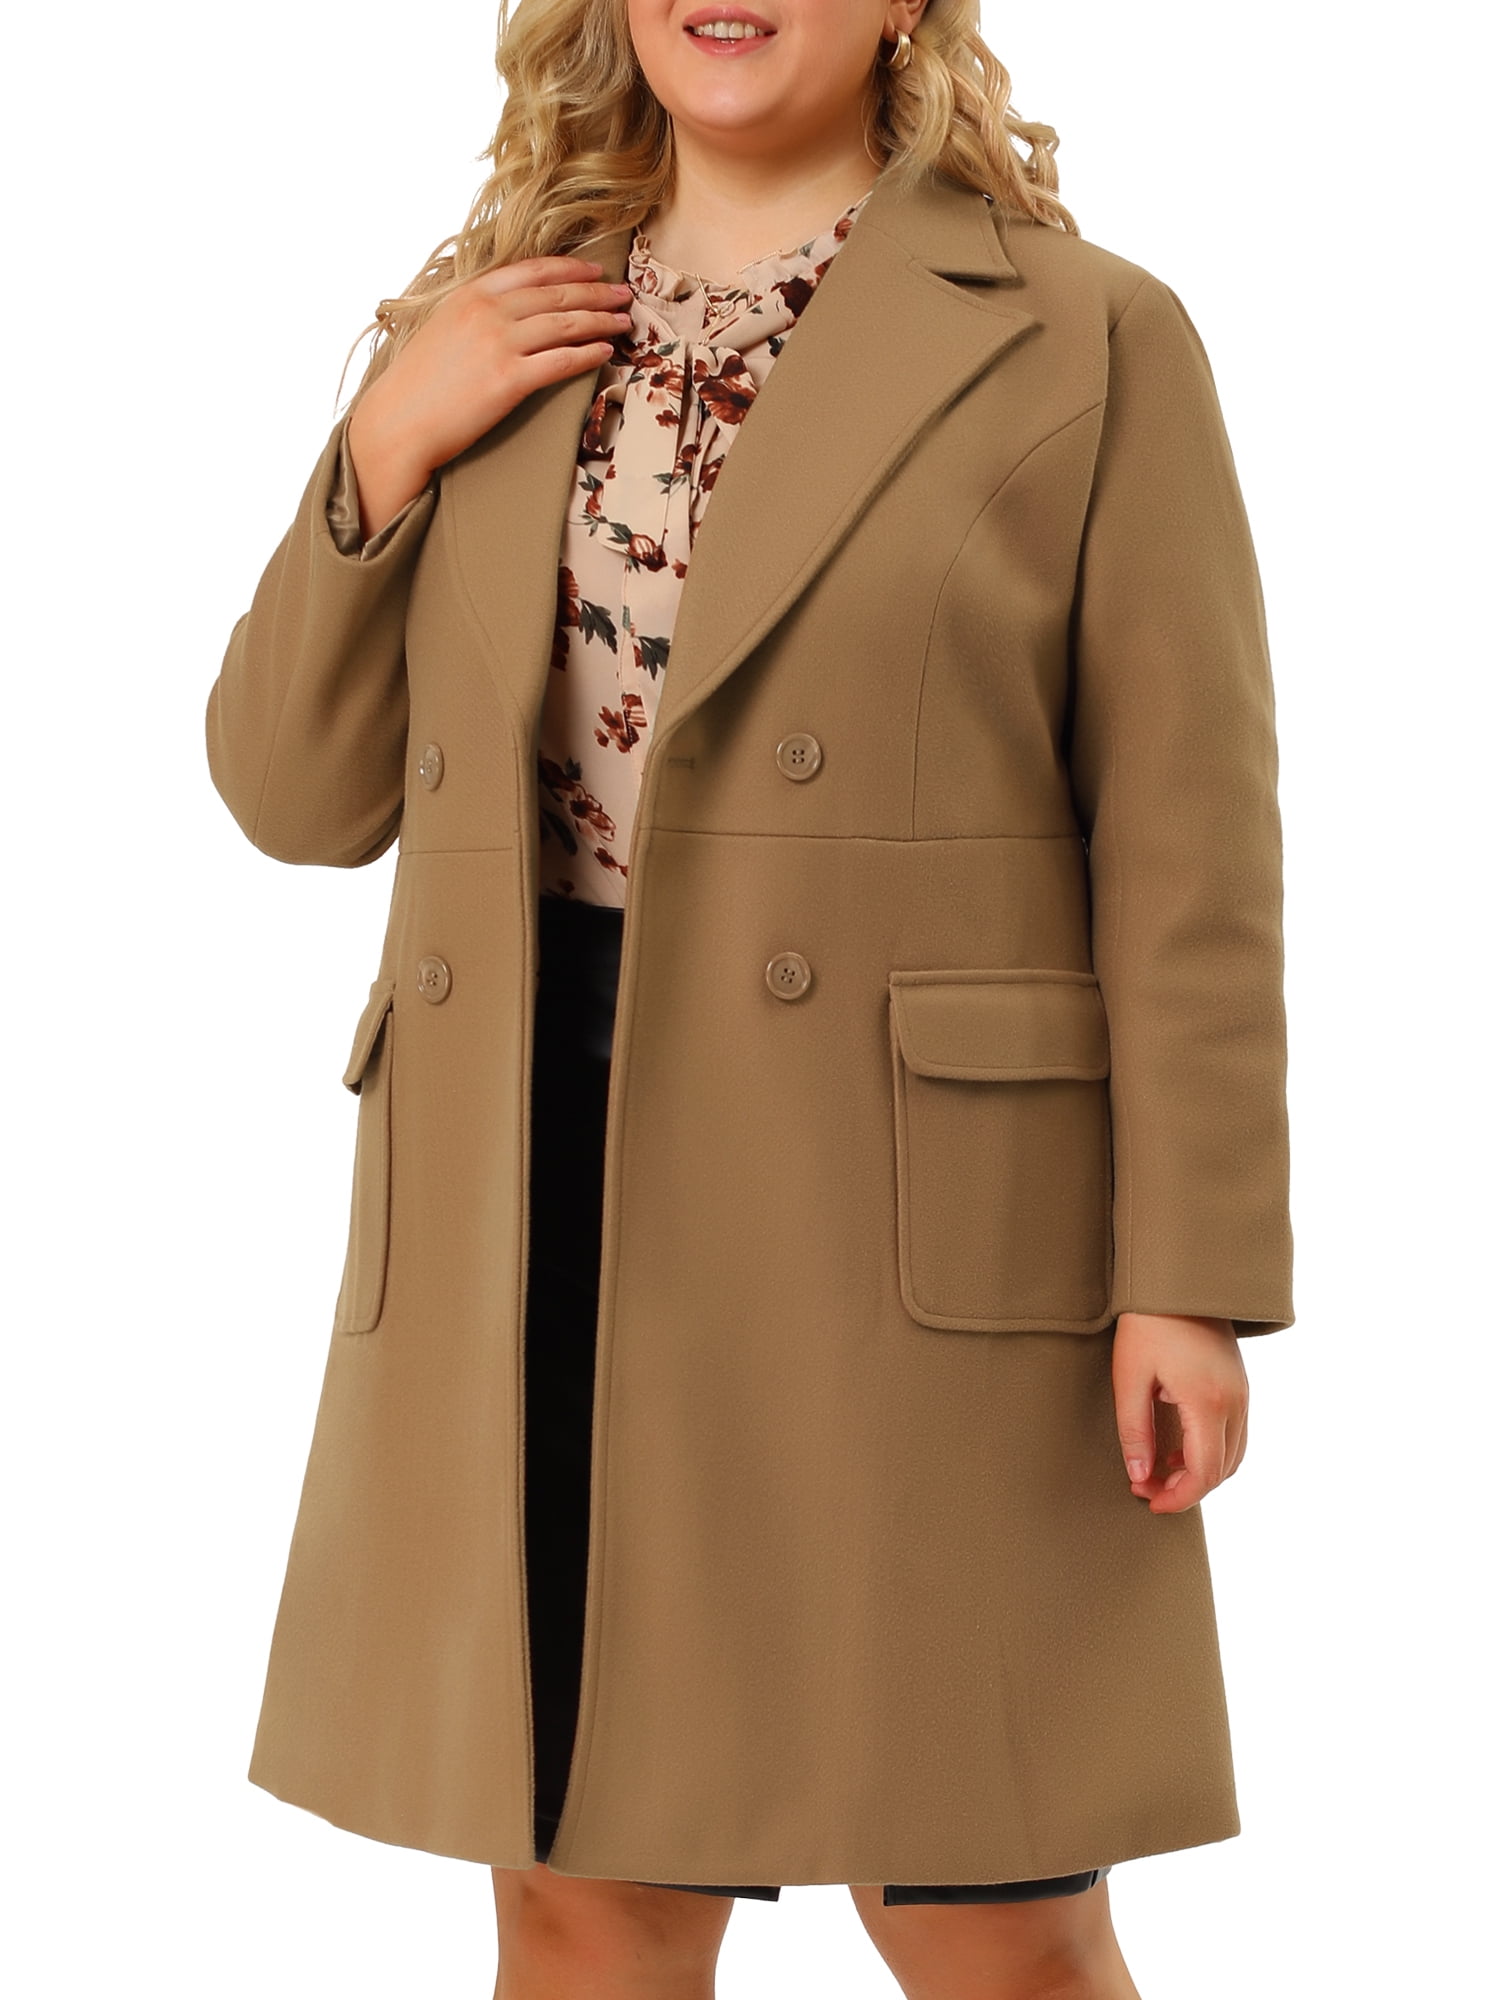 Agnes Orinda Womens Plus Size Notched Lapel Double Breasted Long Coat 